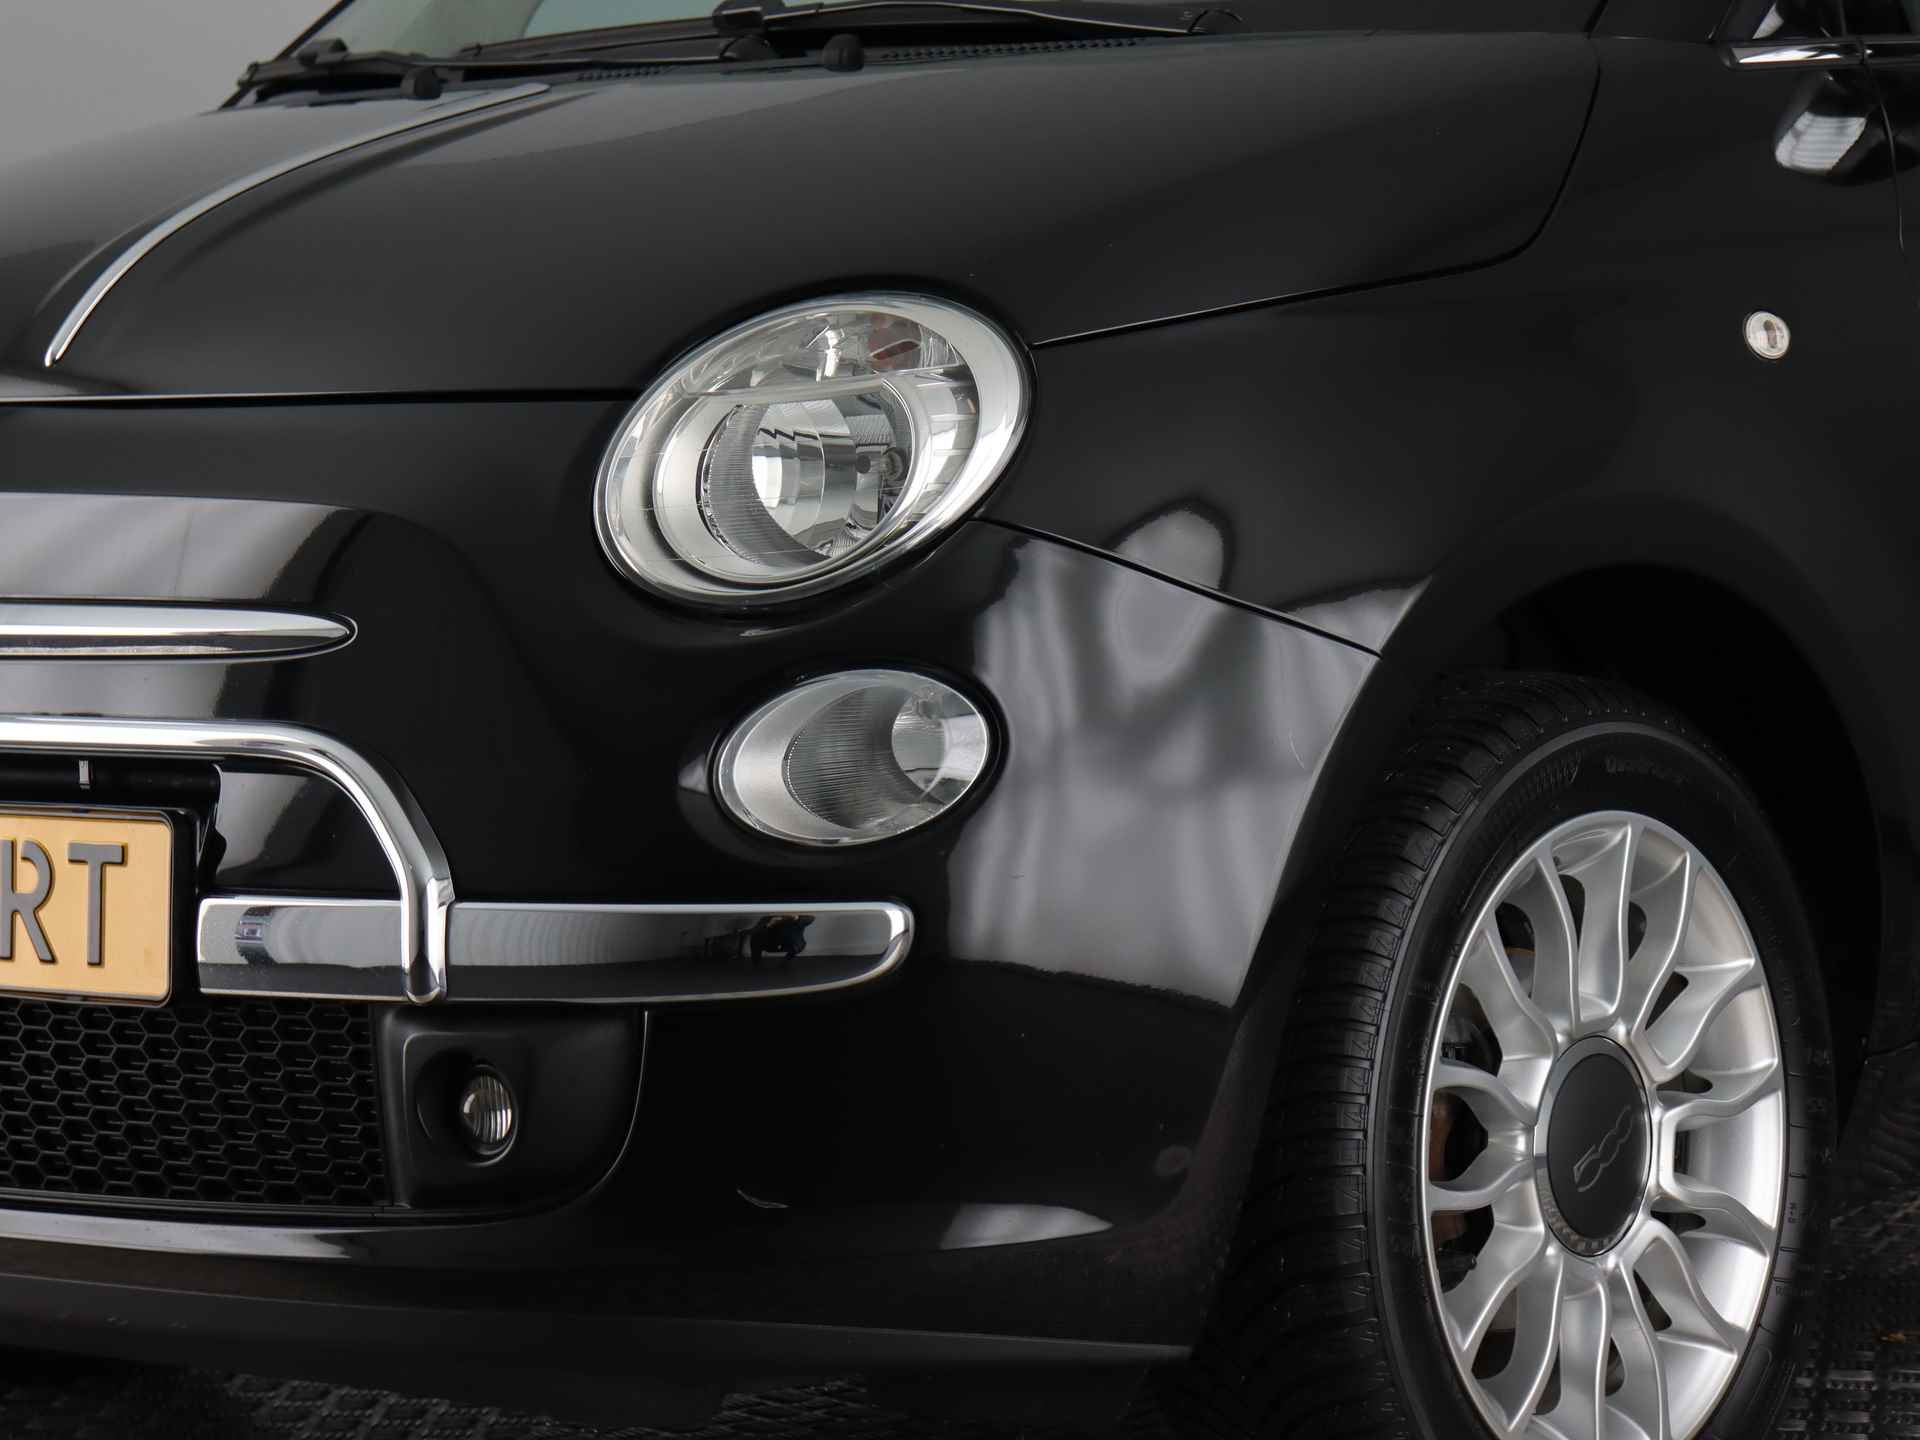 Fiat 500C 1.2 Lounge (Airco / Bluetooth / City-stand / LM velgen / PDC) - 5/49